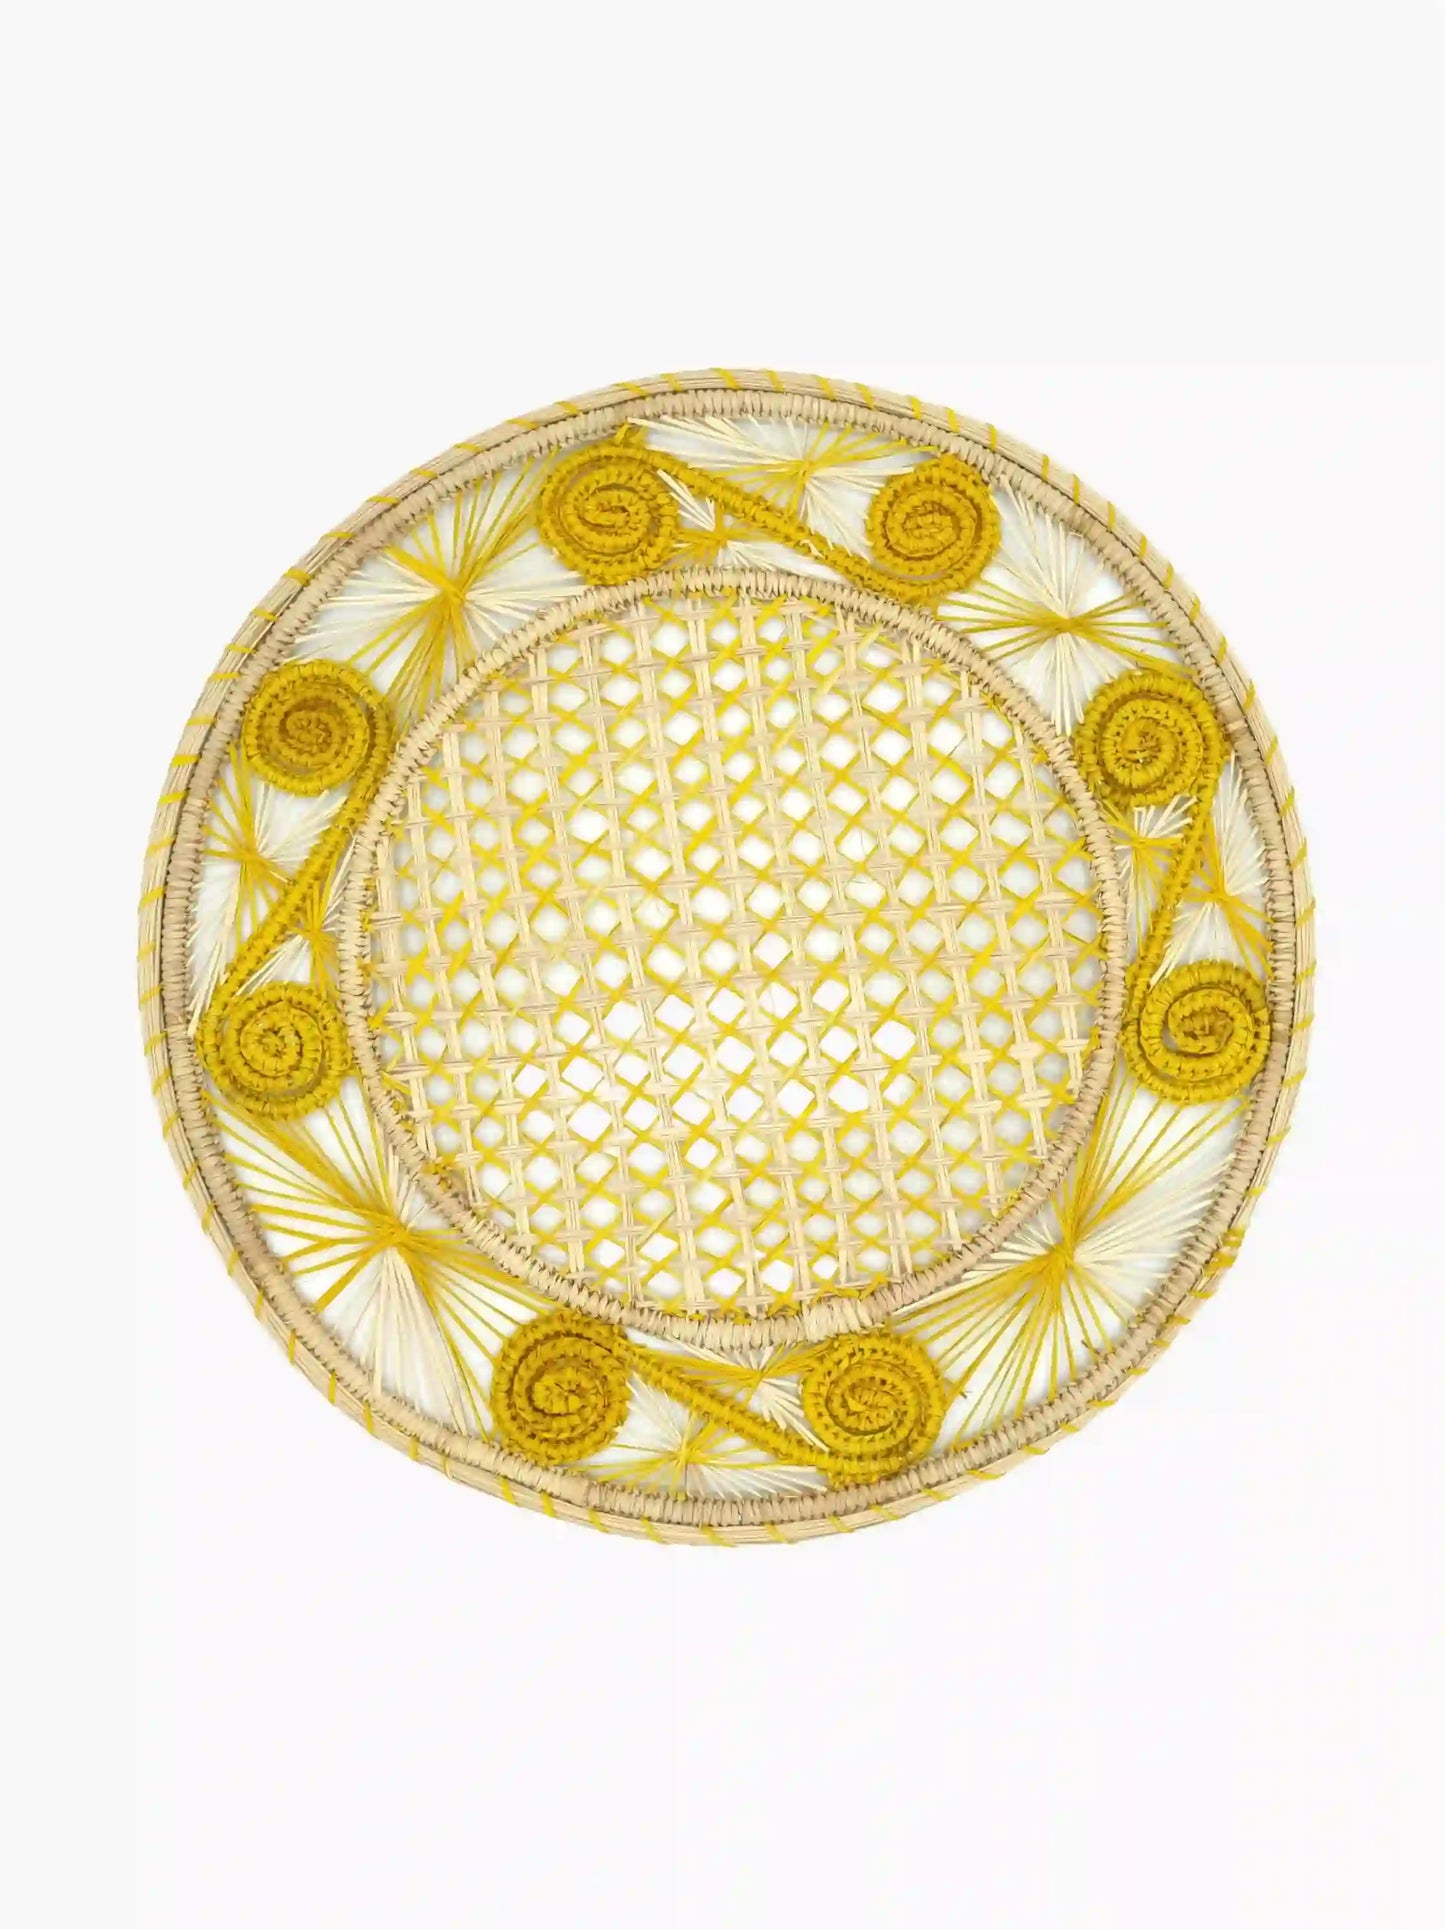 Woven Straw Spiral Placemats Set